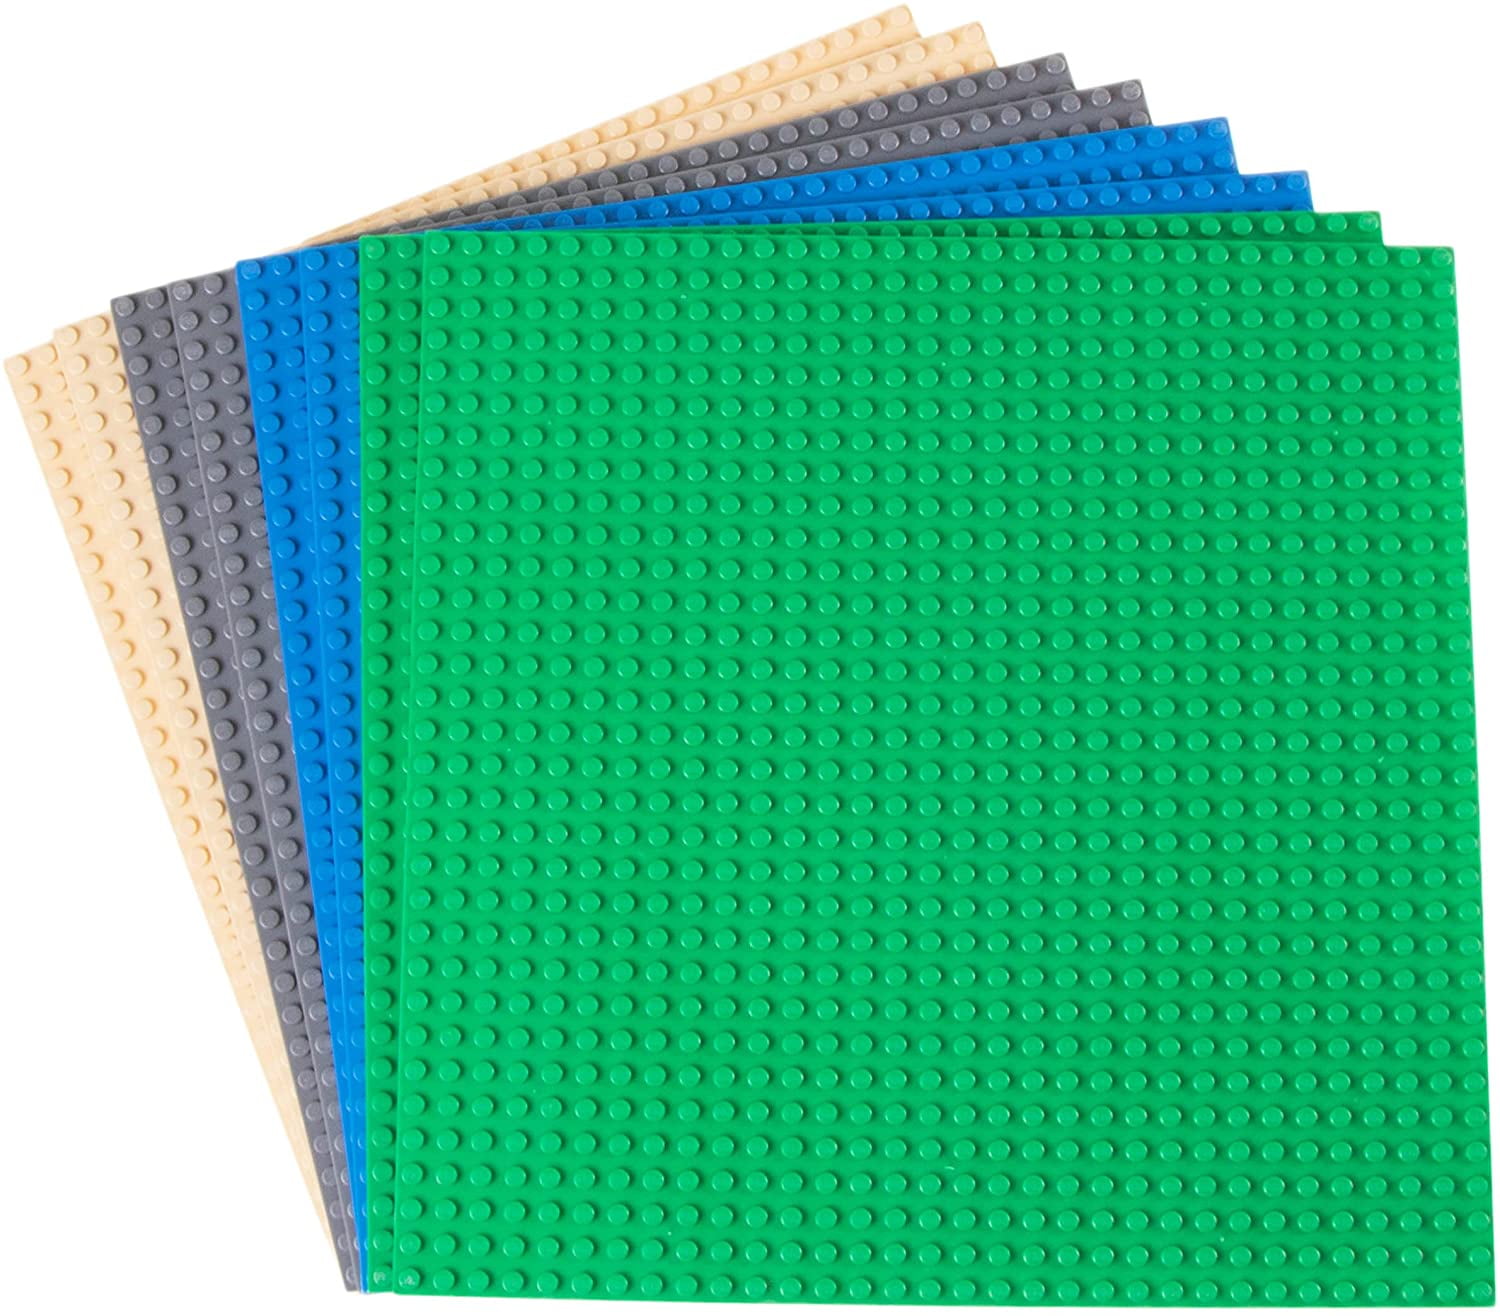 Strictly Briks Classic Stackable Baseplates - LEGO Compatible Base Plates -  Set of 8 in Blue, Green, Gray, and Sand 